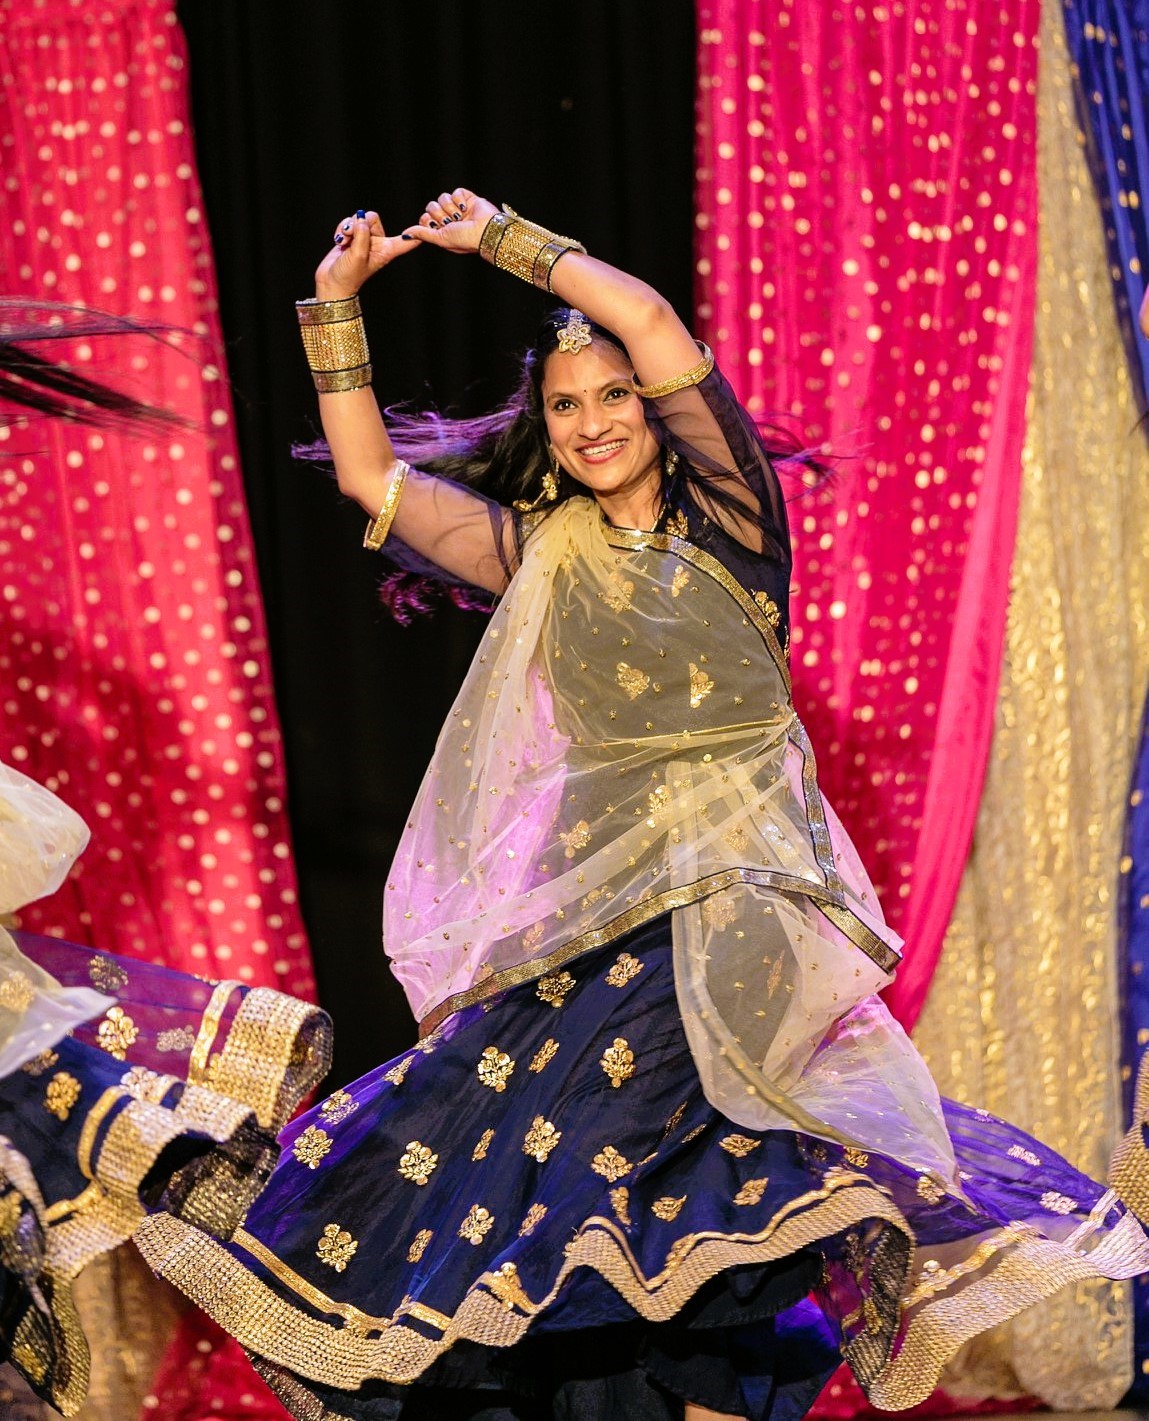 A woman dancing with her arms raised, wearing a traditional Indian-style dress.